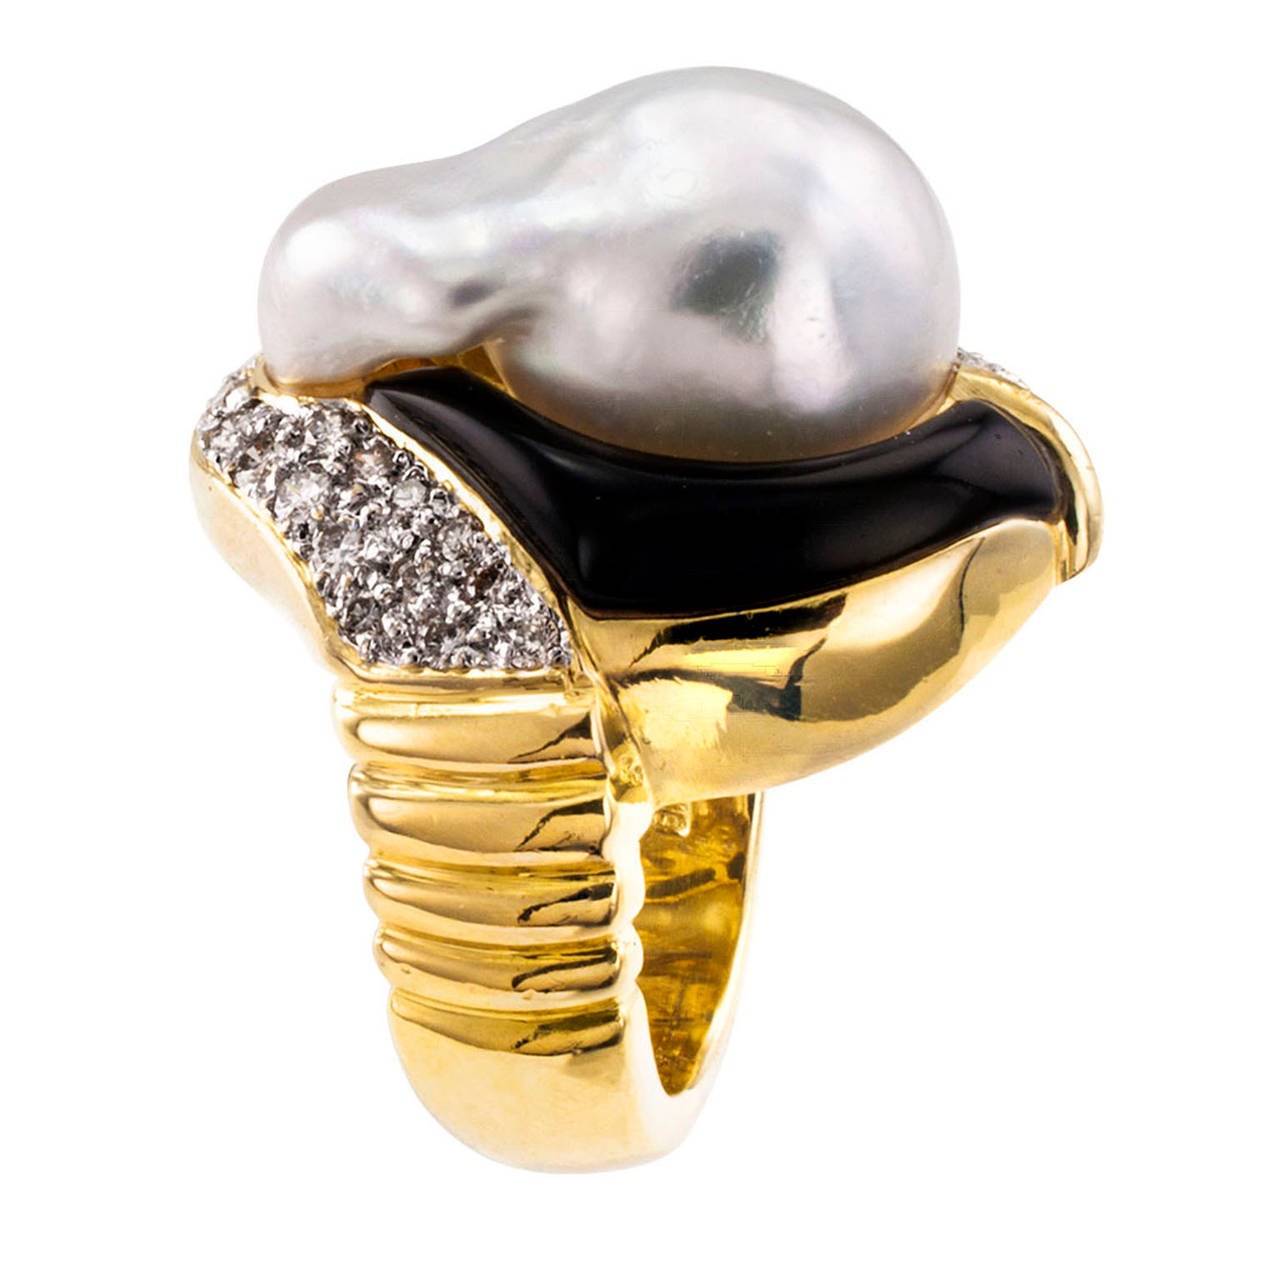 Baroque South Sea Pearl Onyx and Diamond Ring

An inventive way of bringing together precious materials to create a design that has the visual qualities of a dream. Sporting a distinctly different look form every angle you look at it.  Thus making a